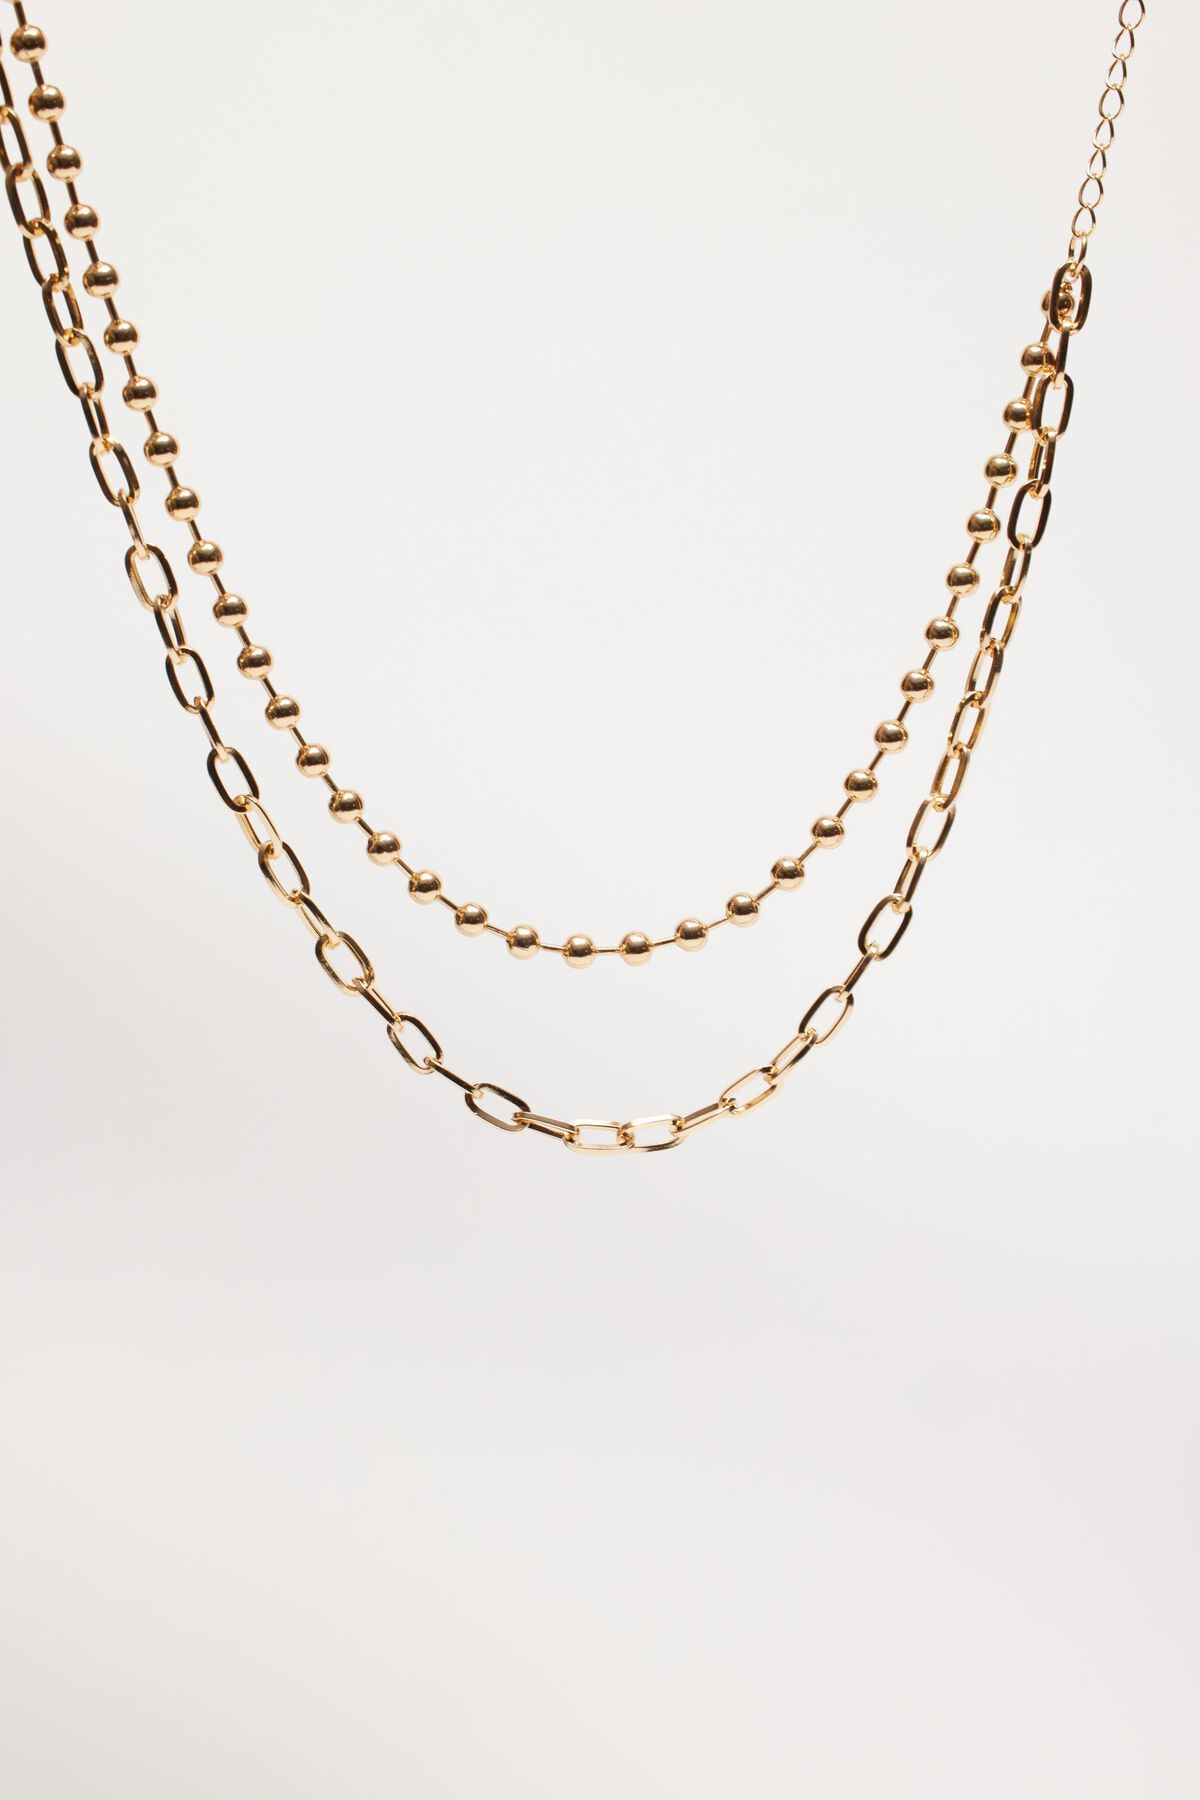 Dynamite Layered Ball Chain & Paperclip necklace. 2